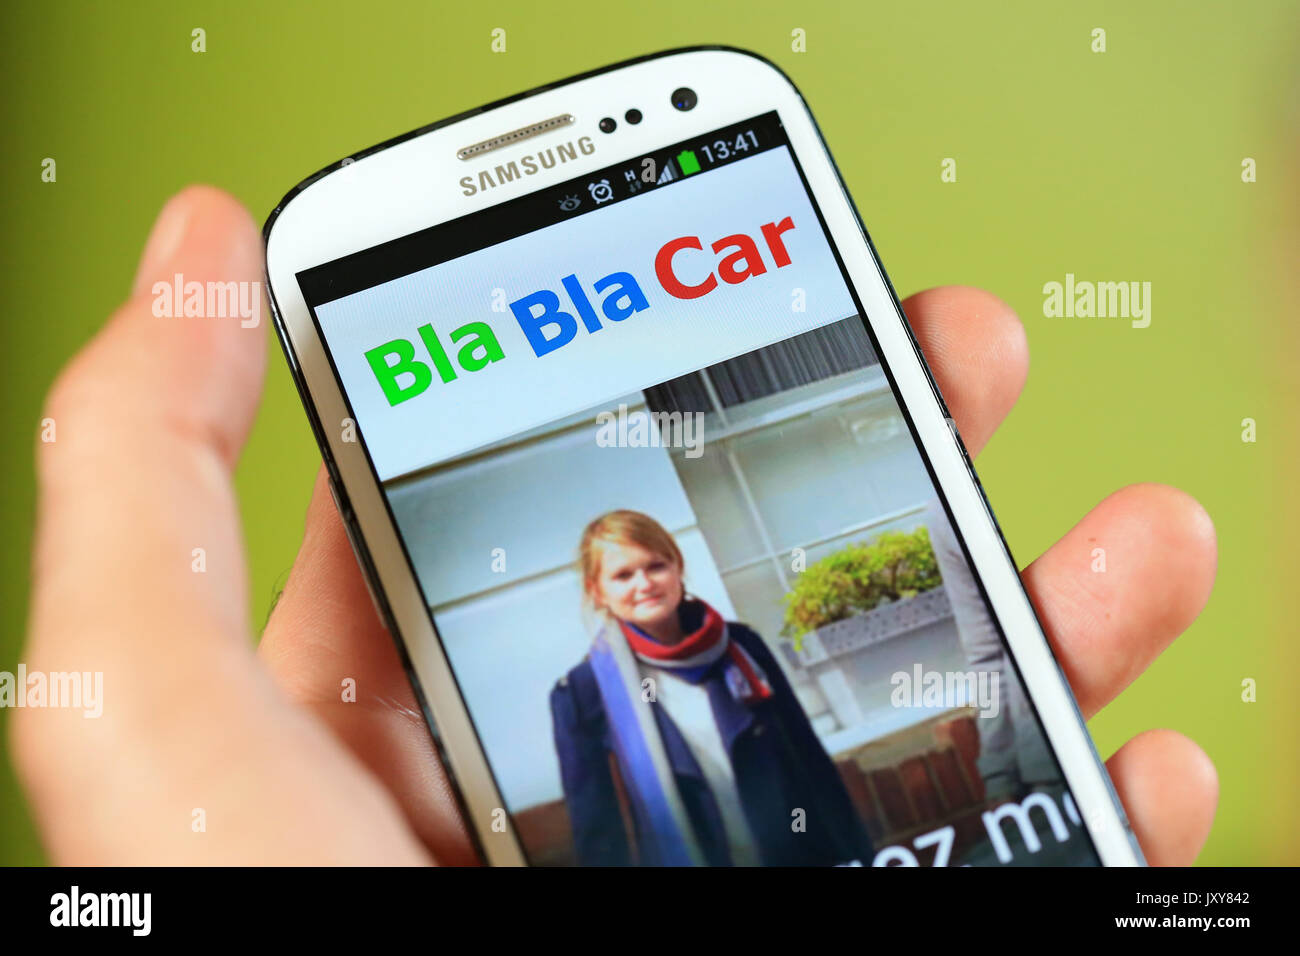 BlaBlaCar App on a smartphone, long distance carpooling service connecting drivers with empty seats to people travelling the same way Stock Photo